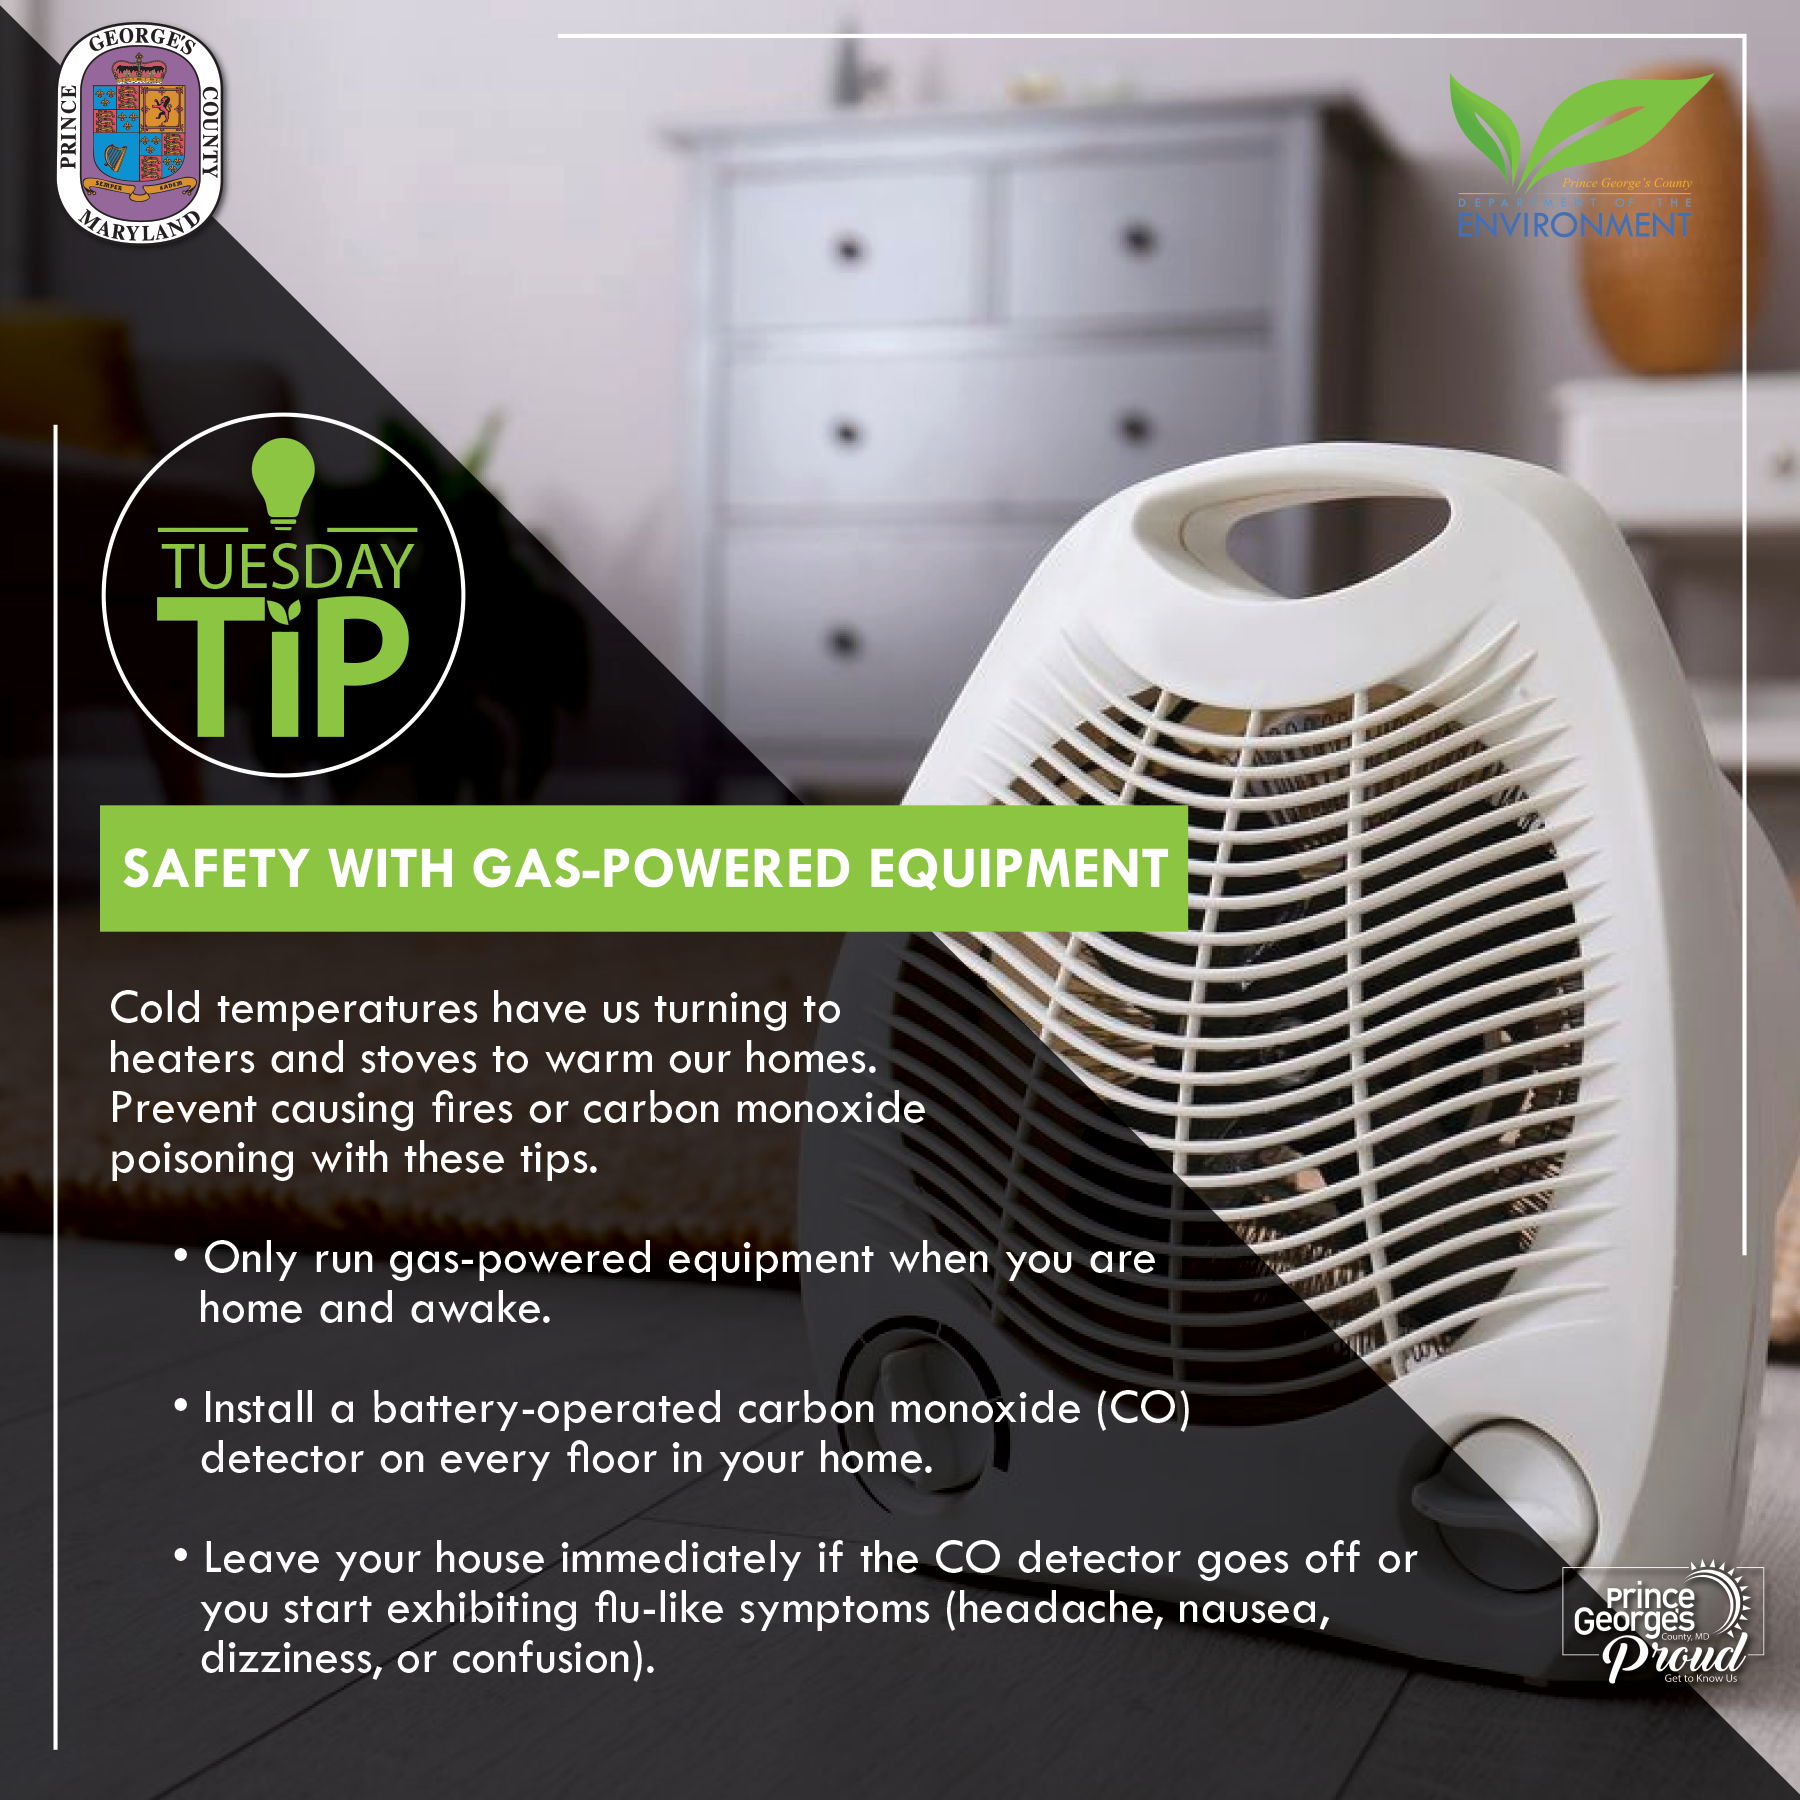 Tues Tip 1.24.23 safetywithgas eng